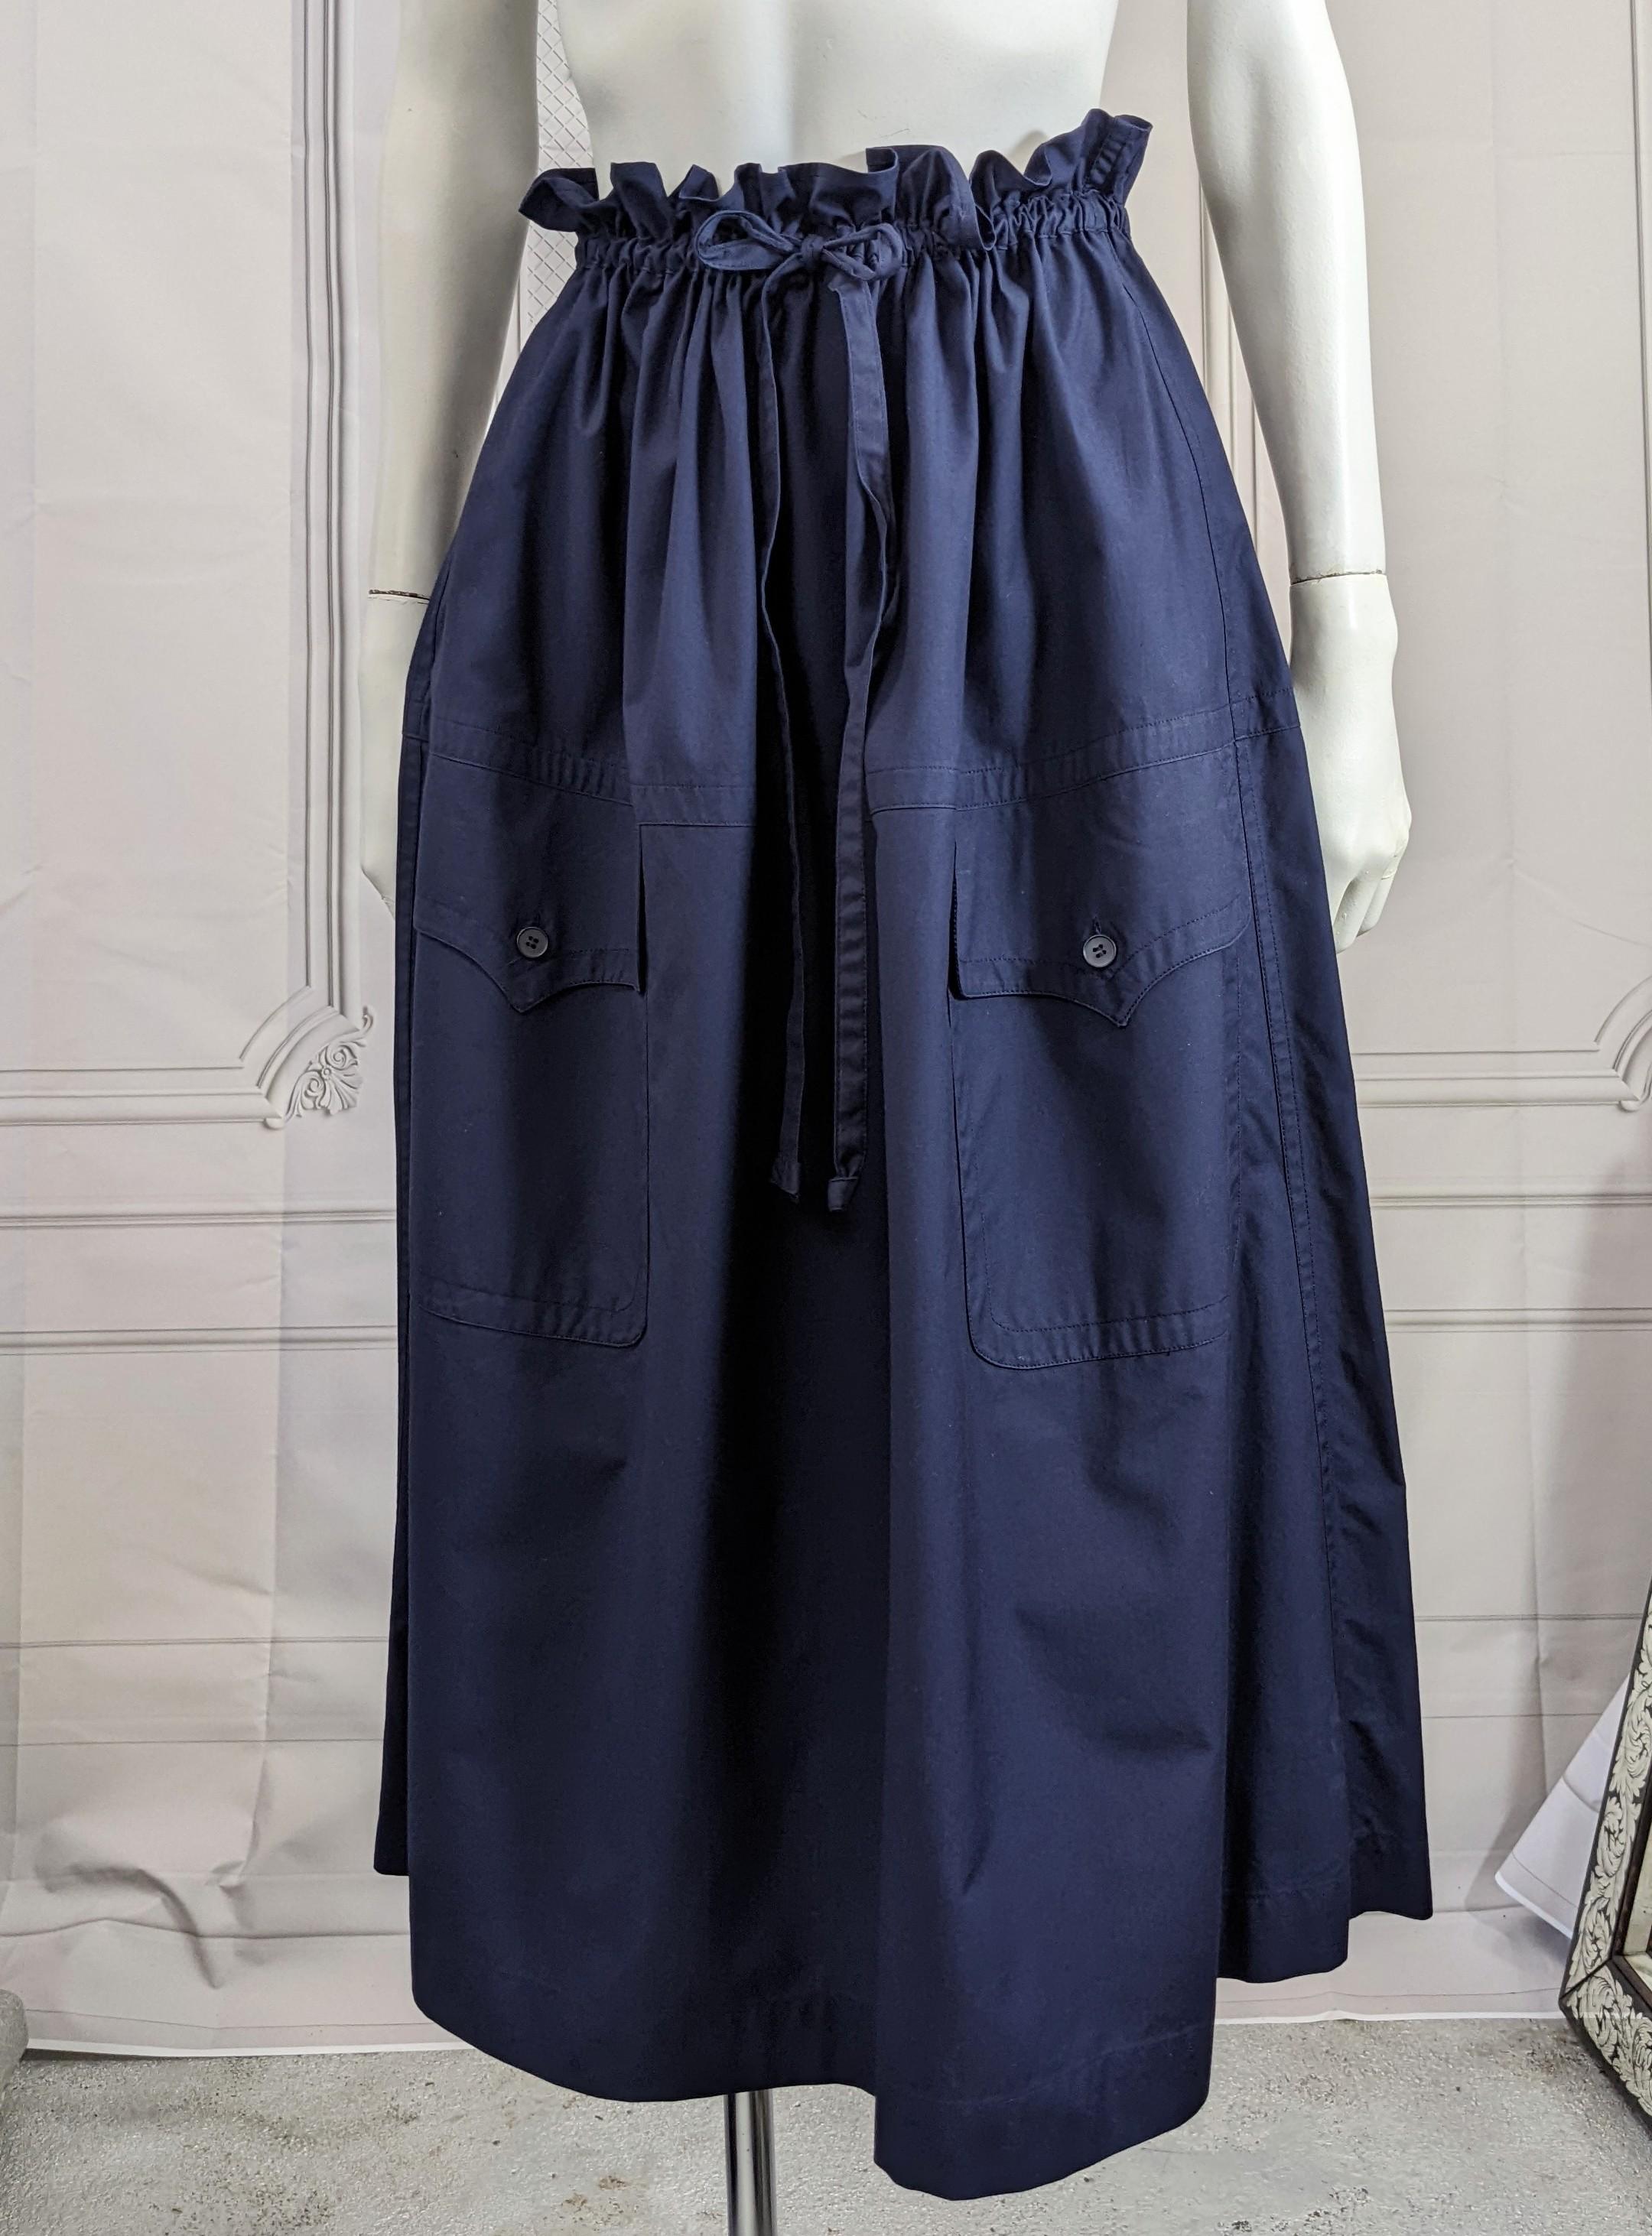 Iconic Yves Saint Laurent Rive Gauche Safari Skirt in crisp navy poplin from the 1980's. Self drawstring waist with low slung massive decorative Safari pockets. Amazing, timeless YSL design which works as a strapless dress for the more creative.